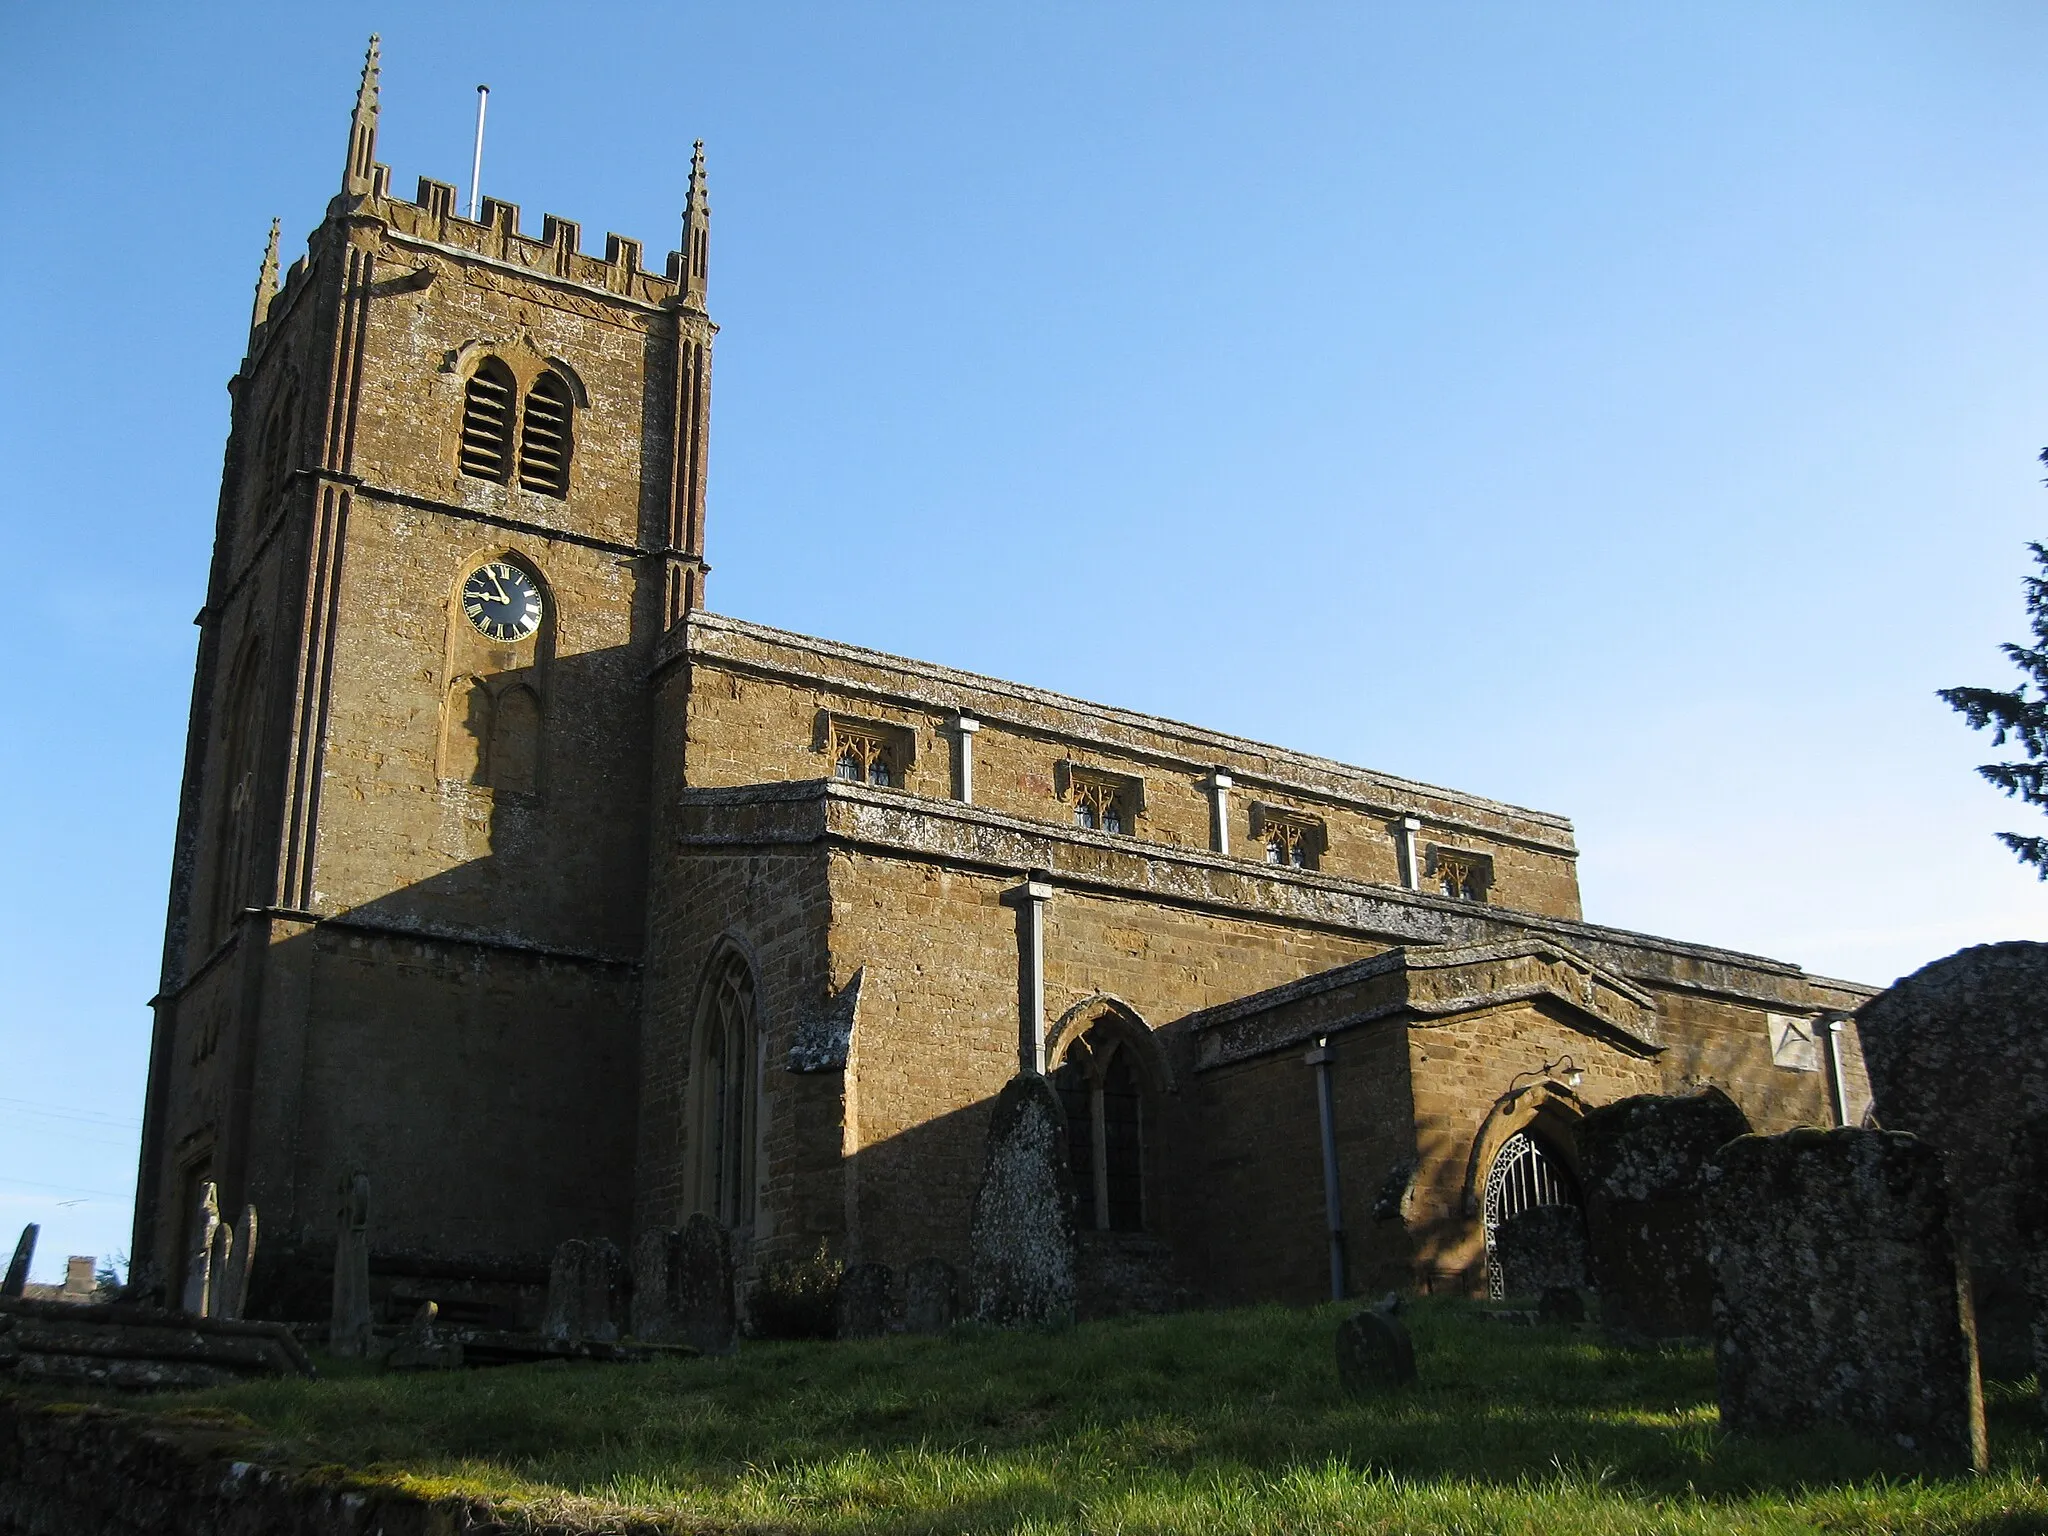 Photo showing: Church of England parish church of All Saints, Wroxton, Oxfordshire. The church is 14th and 15th century. The tower was designed by Sanderson Miller and begun in 1748.